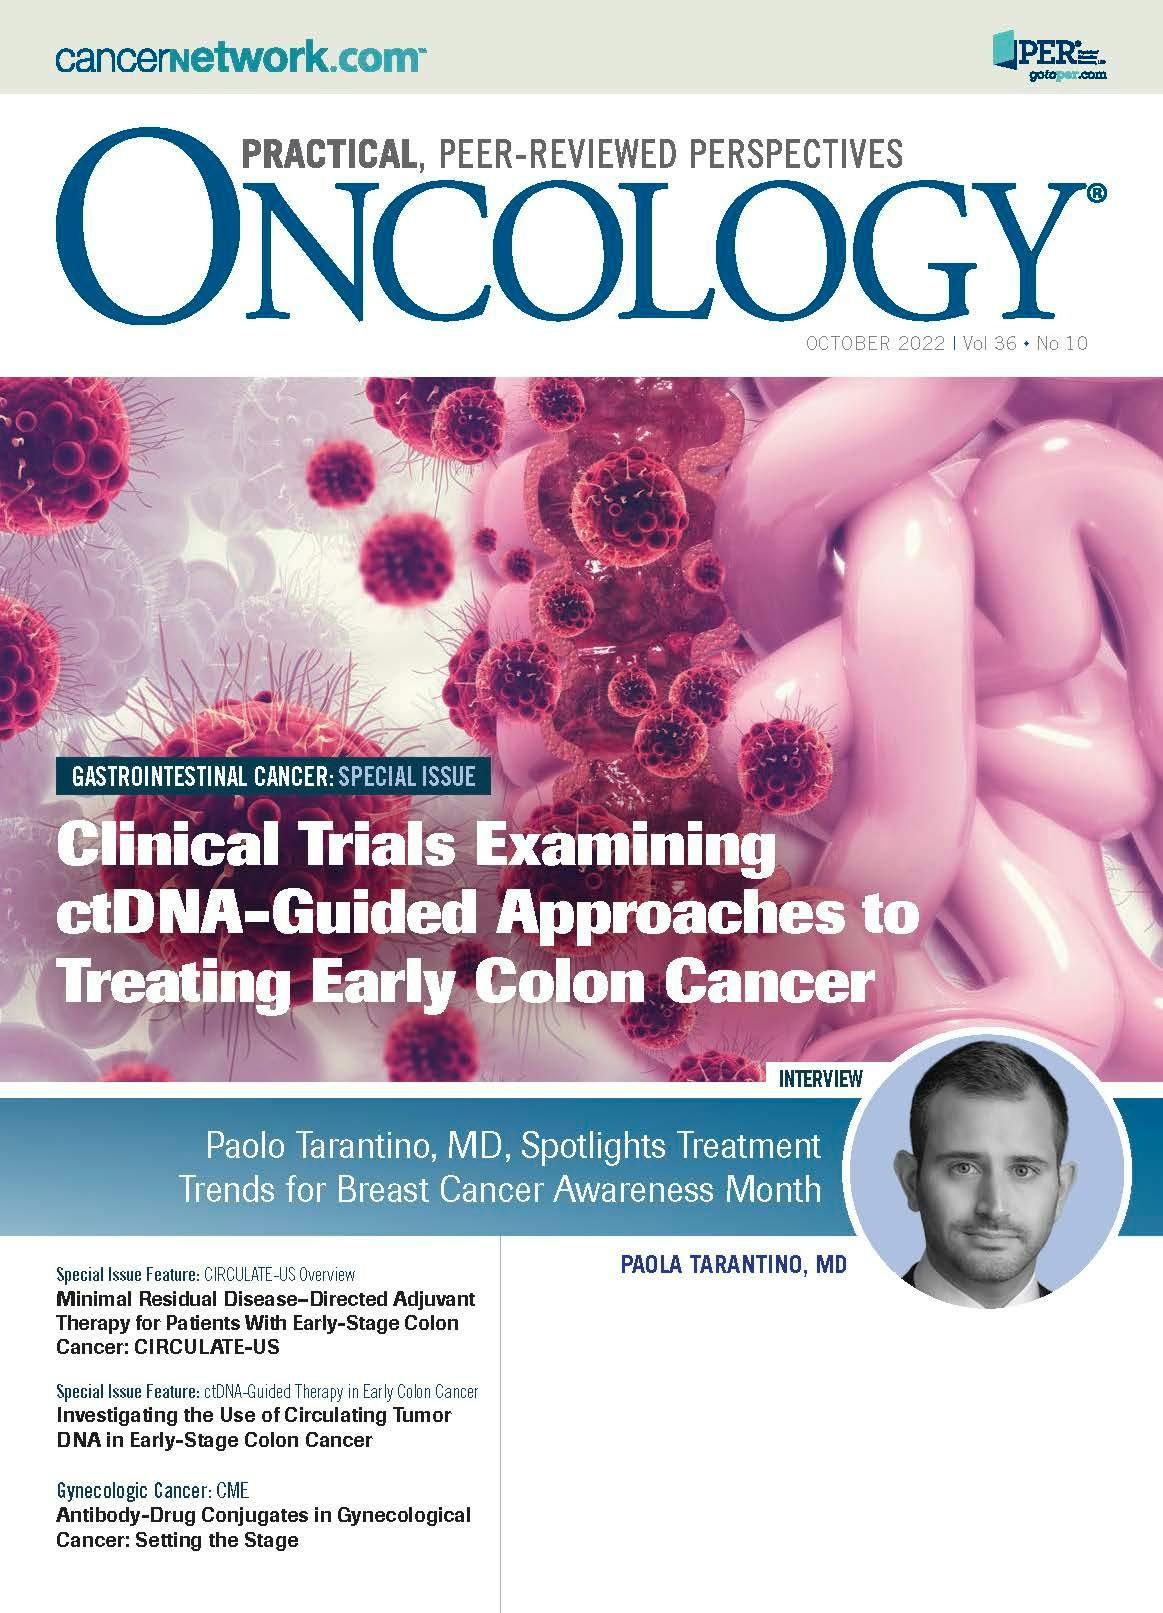 ONCOLOGY Vol 36, Issue 10